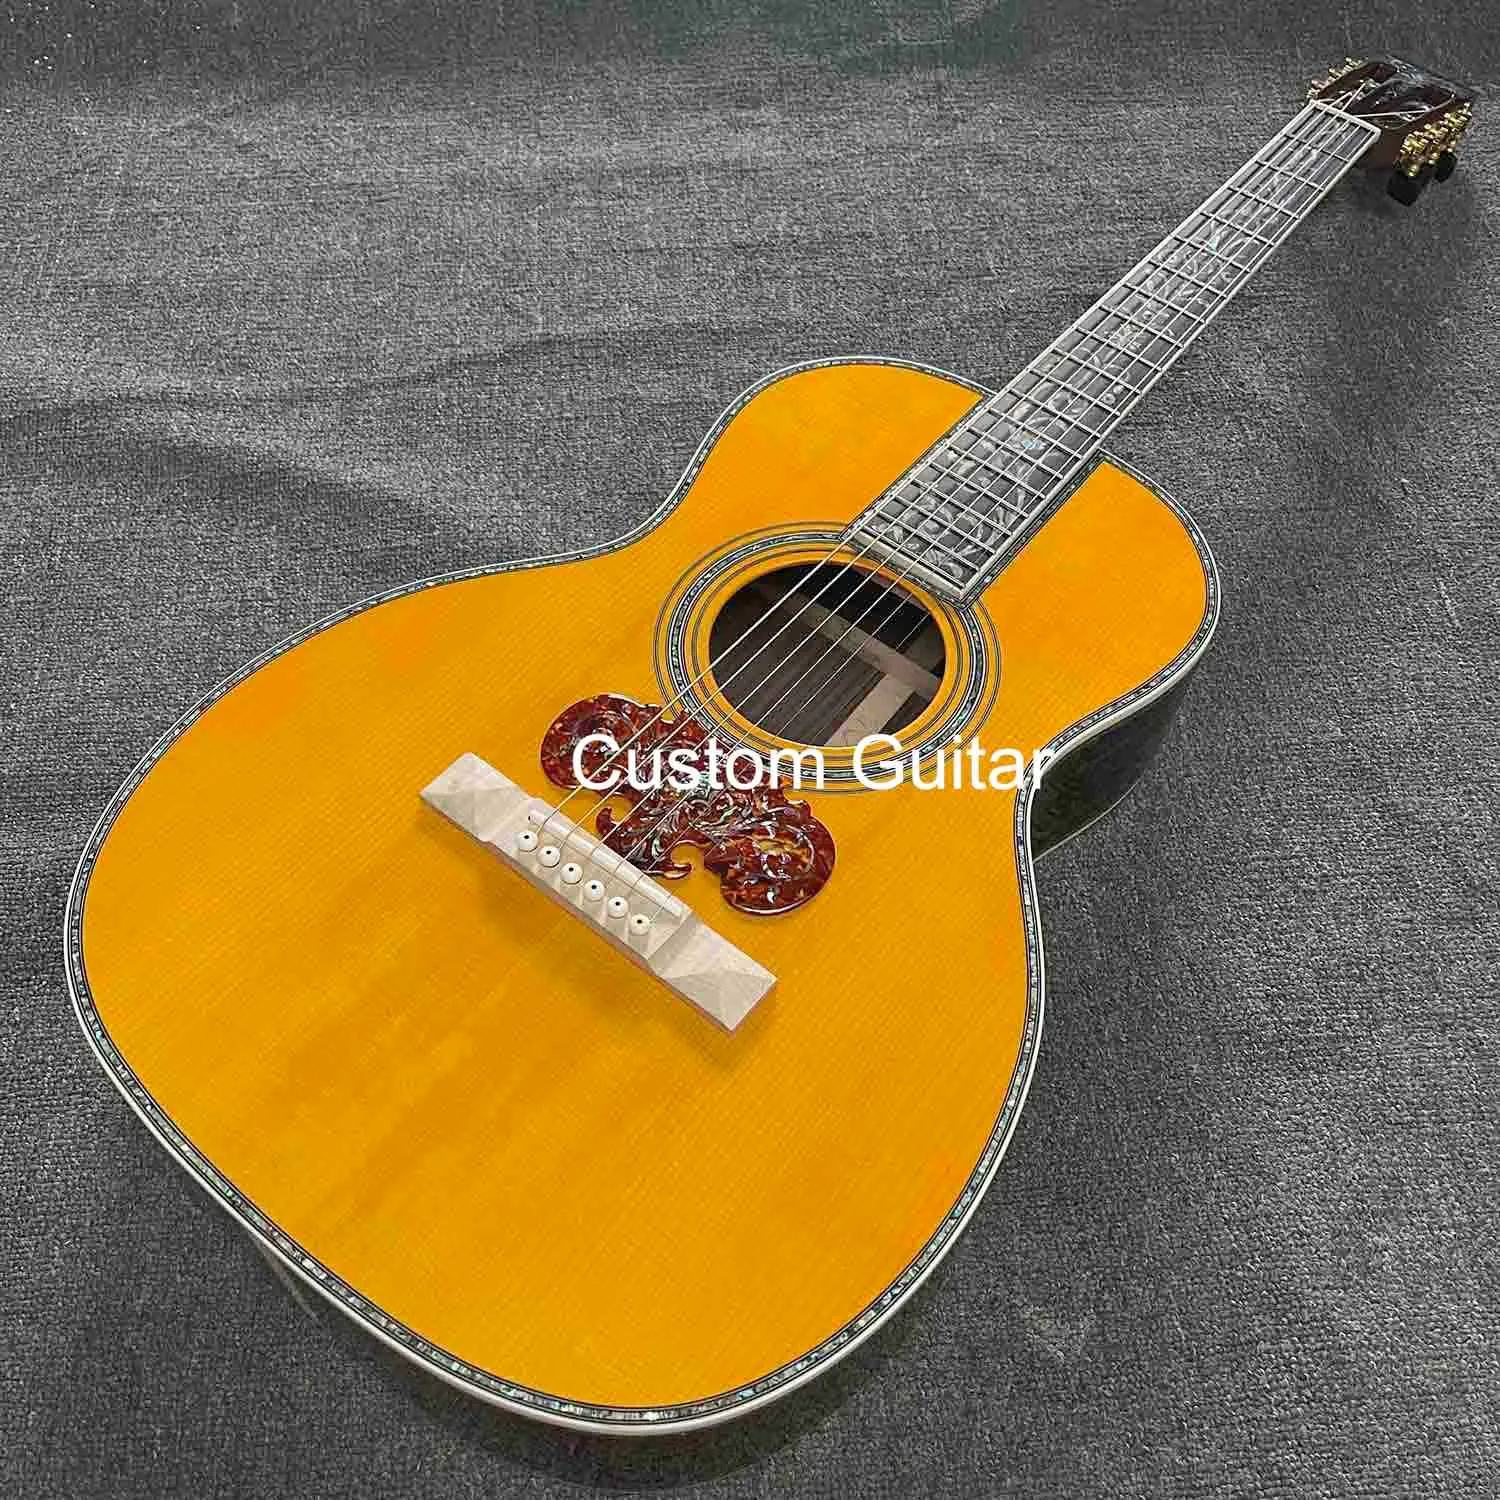 39 Inch OOO Body Solid Spruce Top Solid Rosewood Back Side Abalone Binding Acoustic Guitar Flamed Maple Bridge Accept Guitar, Amp etc OEM